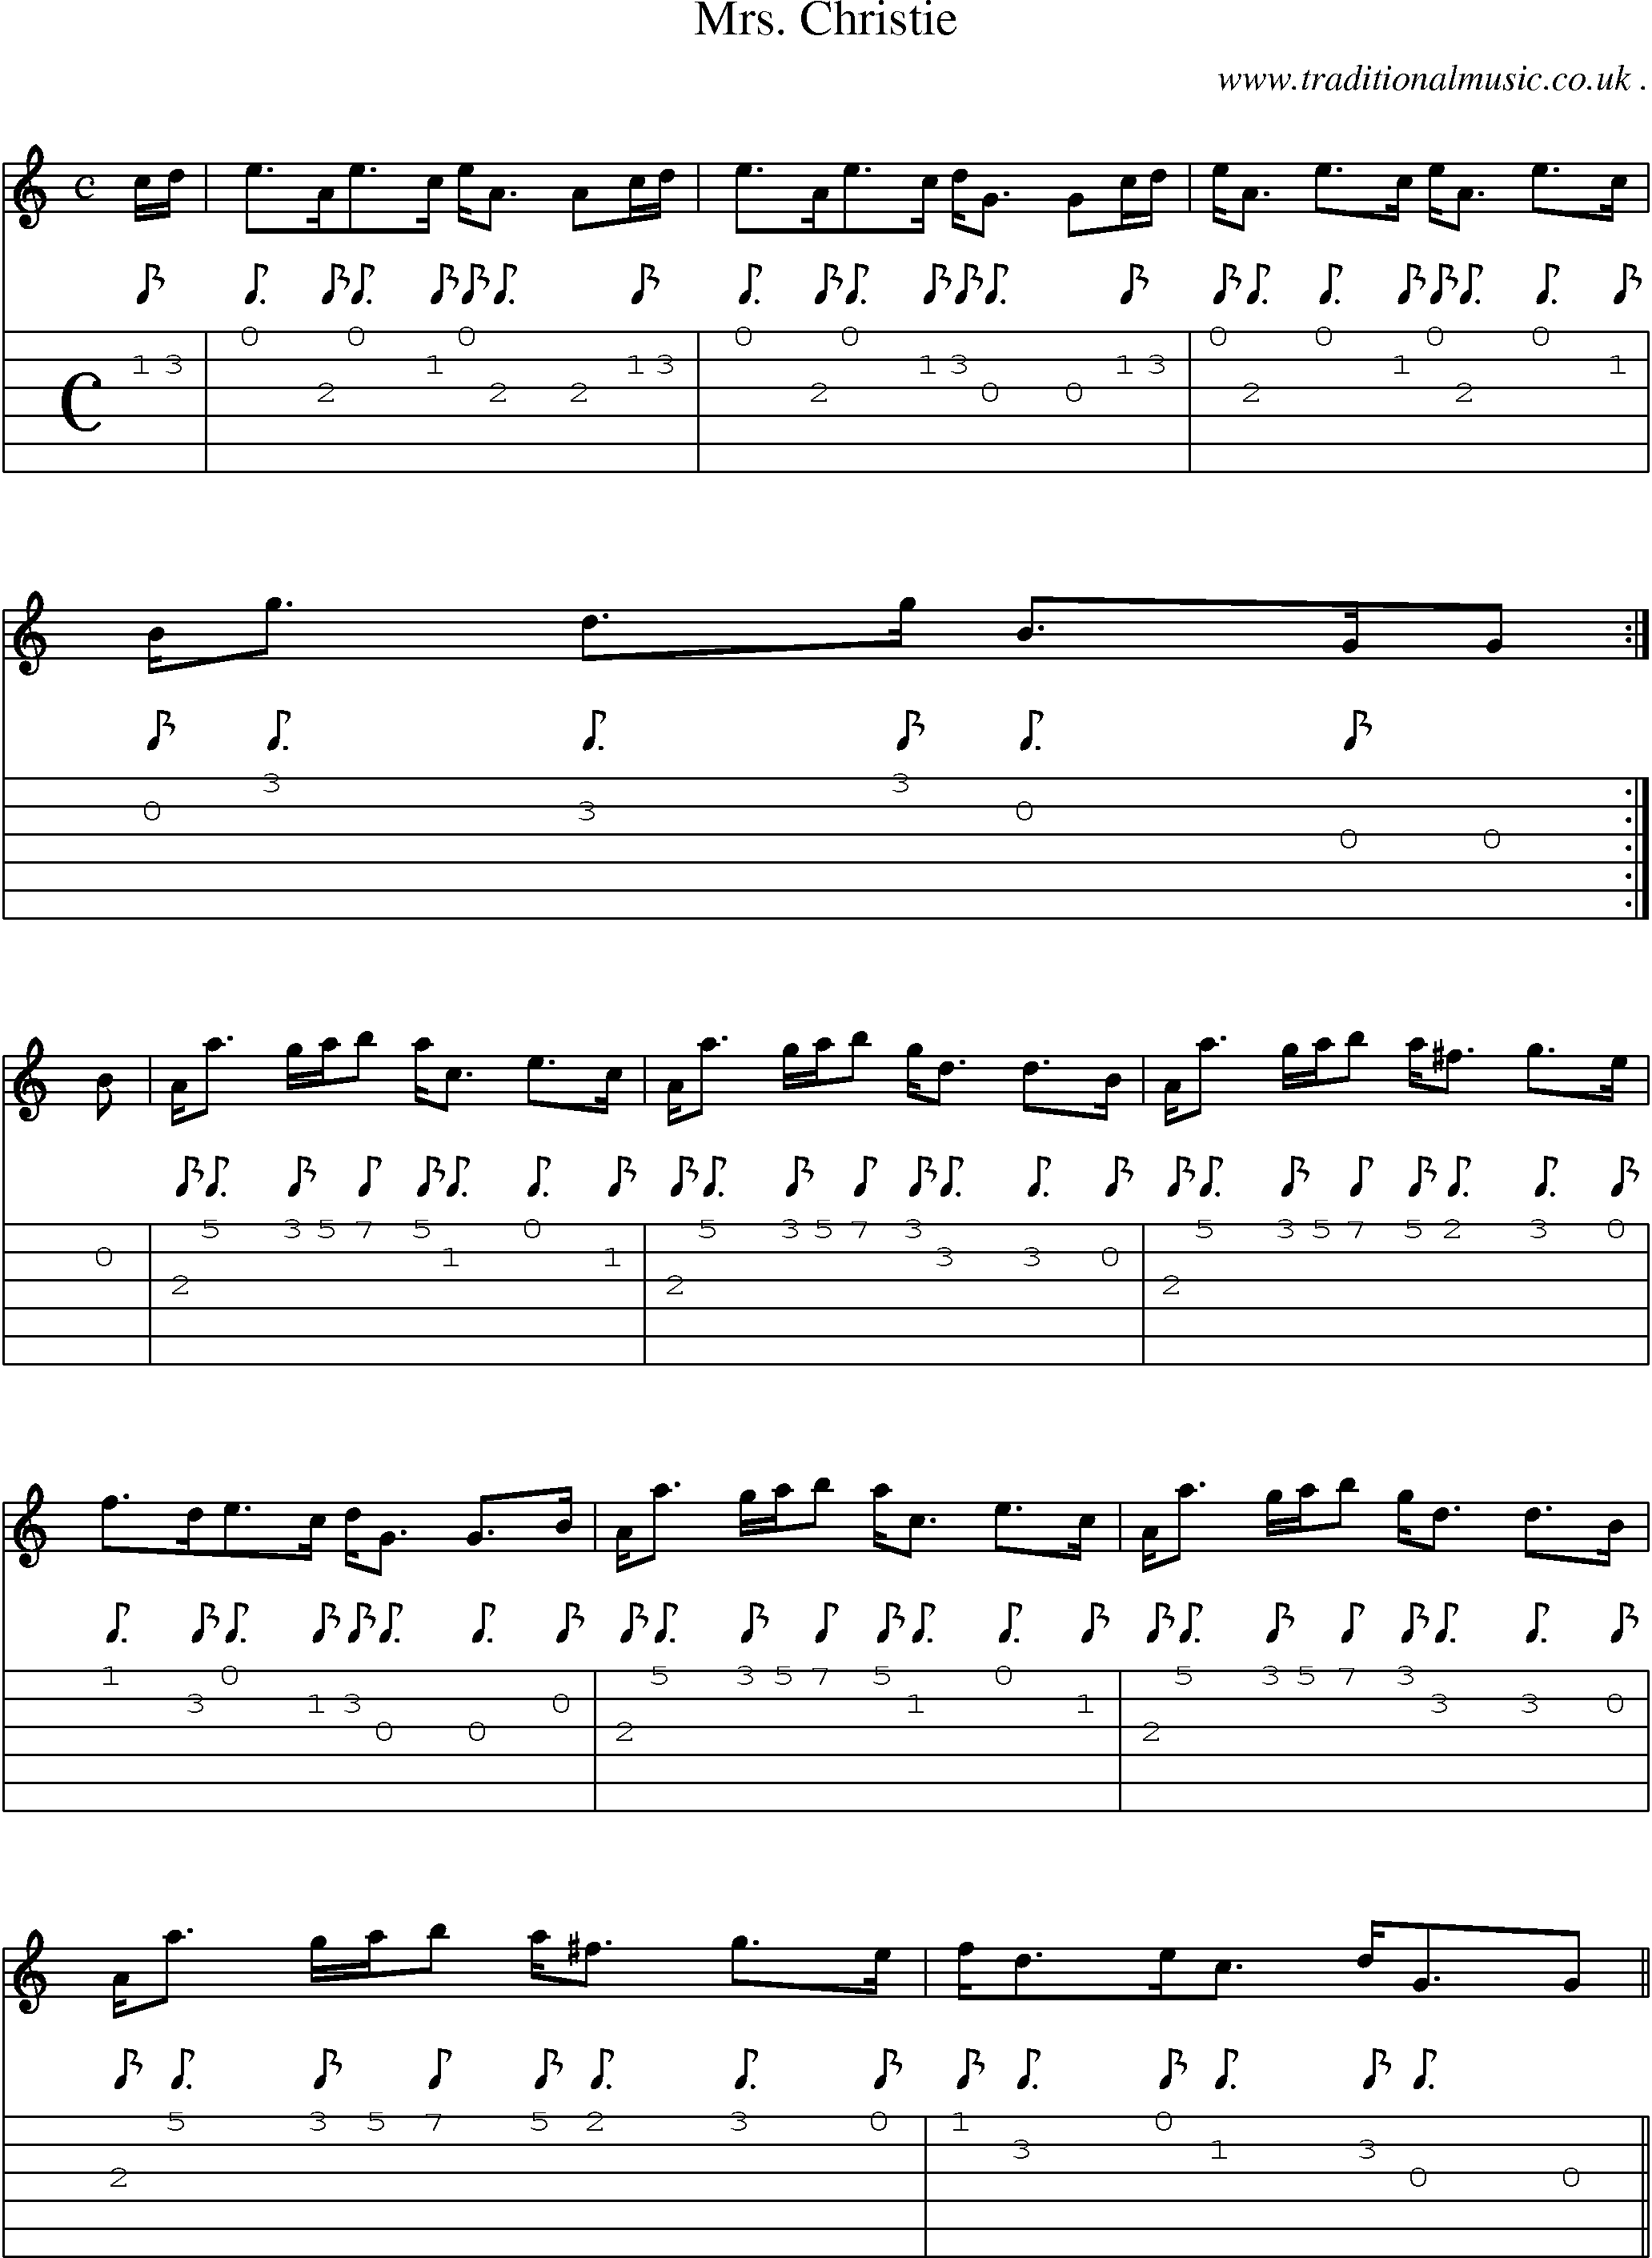 Sheet-music  score, Chords and Guitar Tabs for Mrs Christie